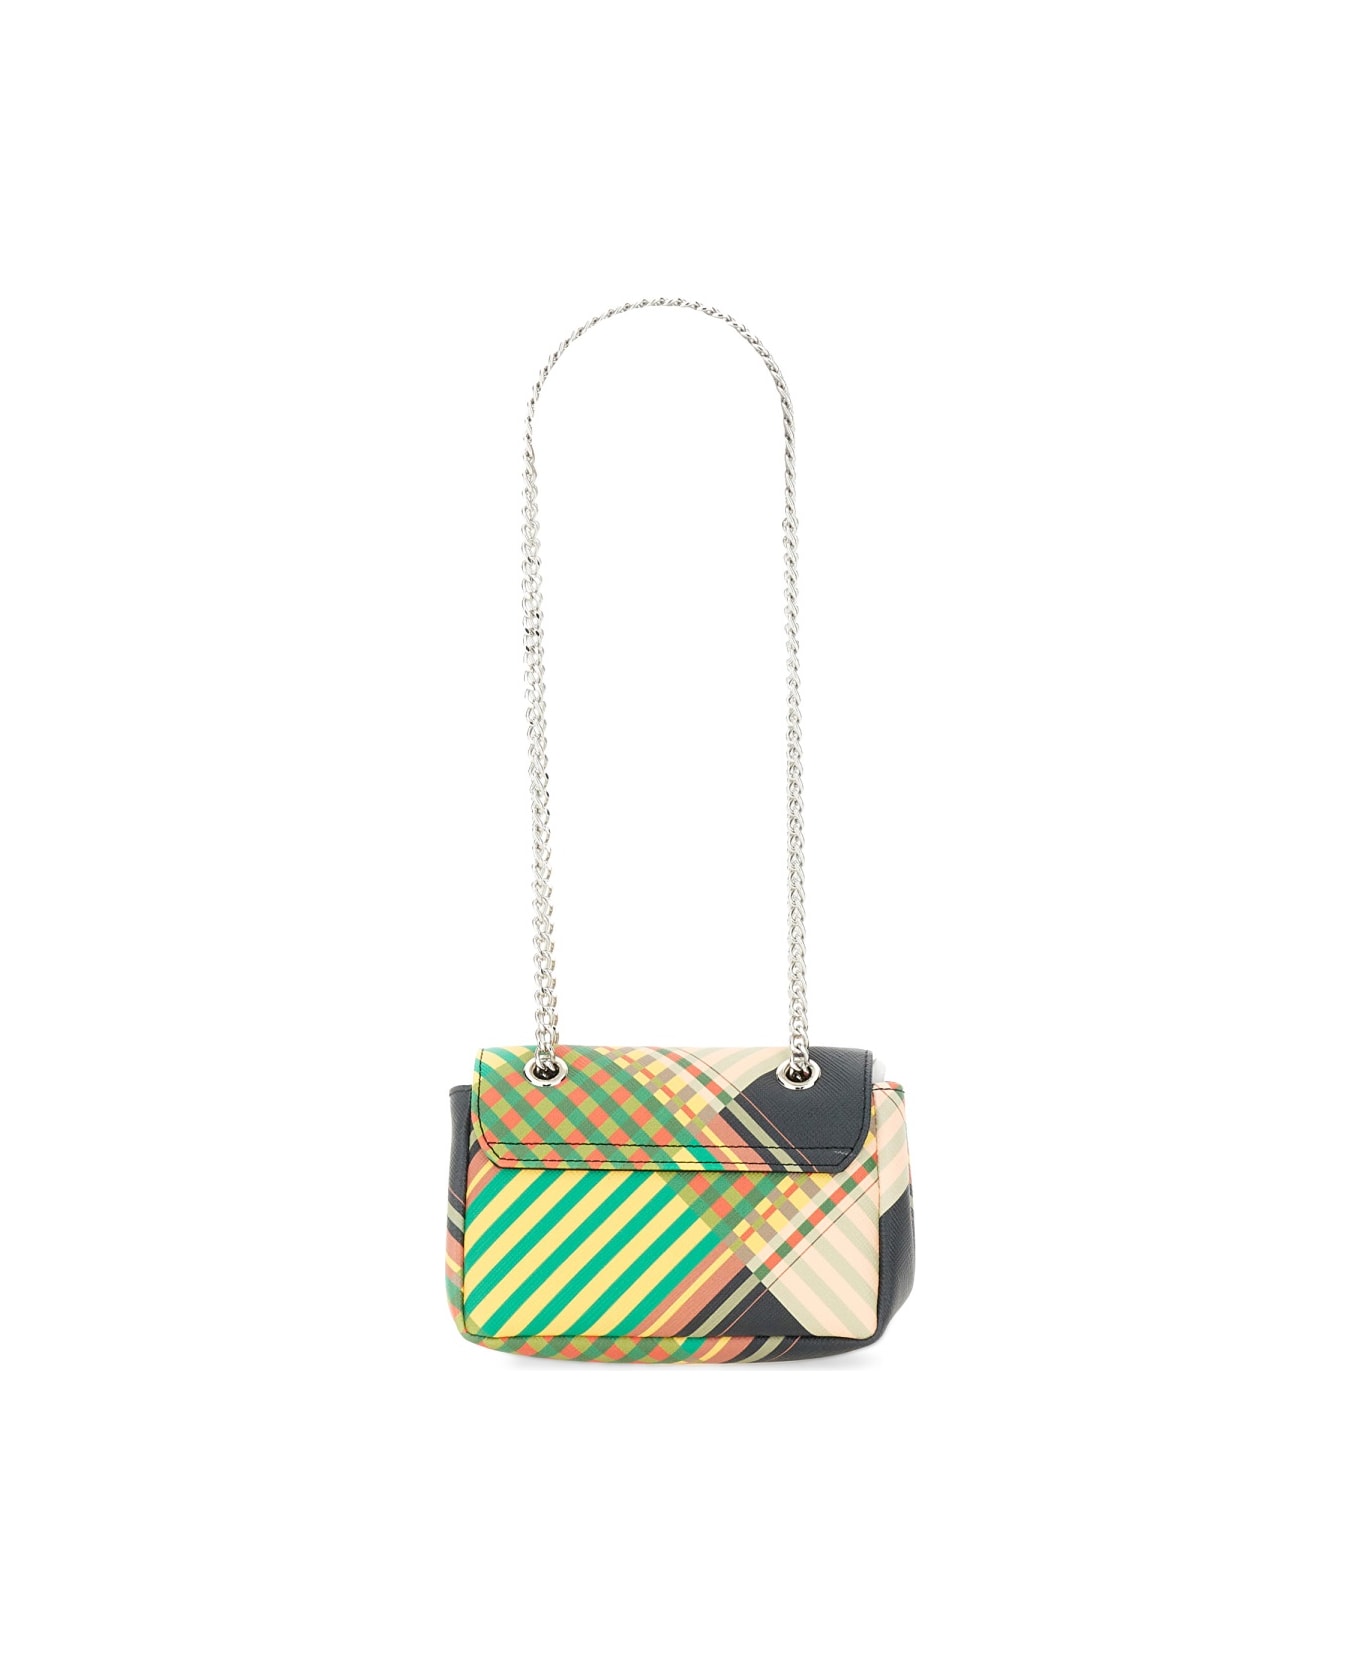 Vivienne Westwood Small Bag With Chain - MULTICOLOUR